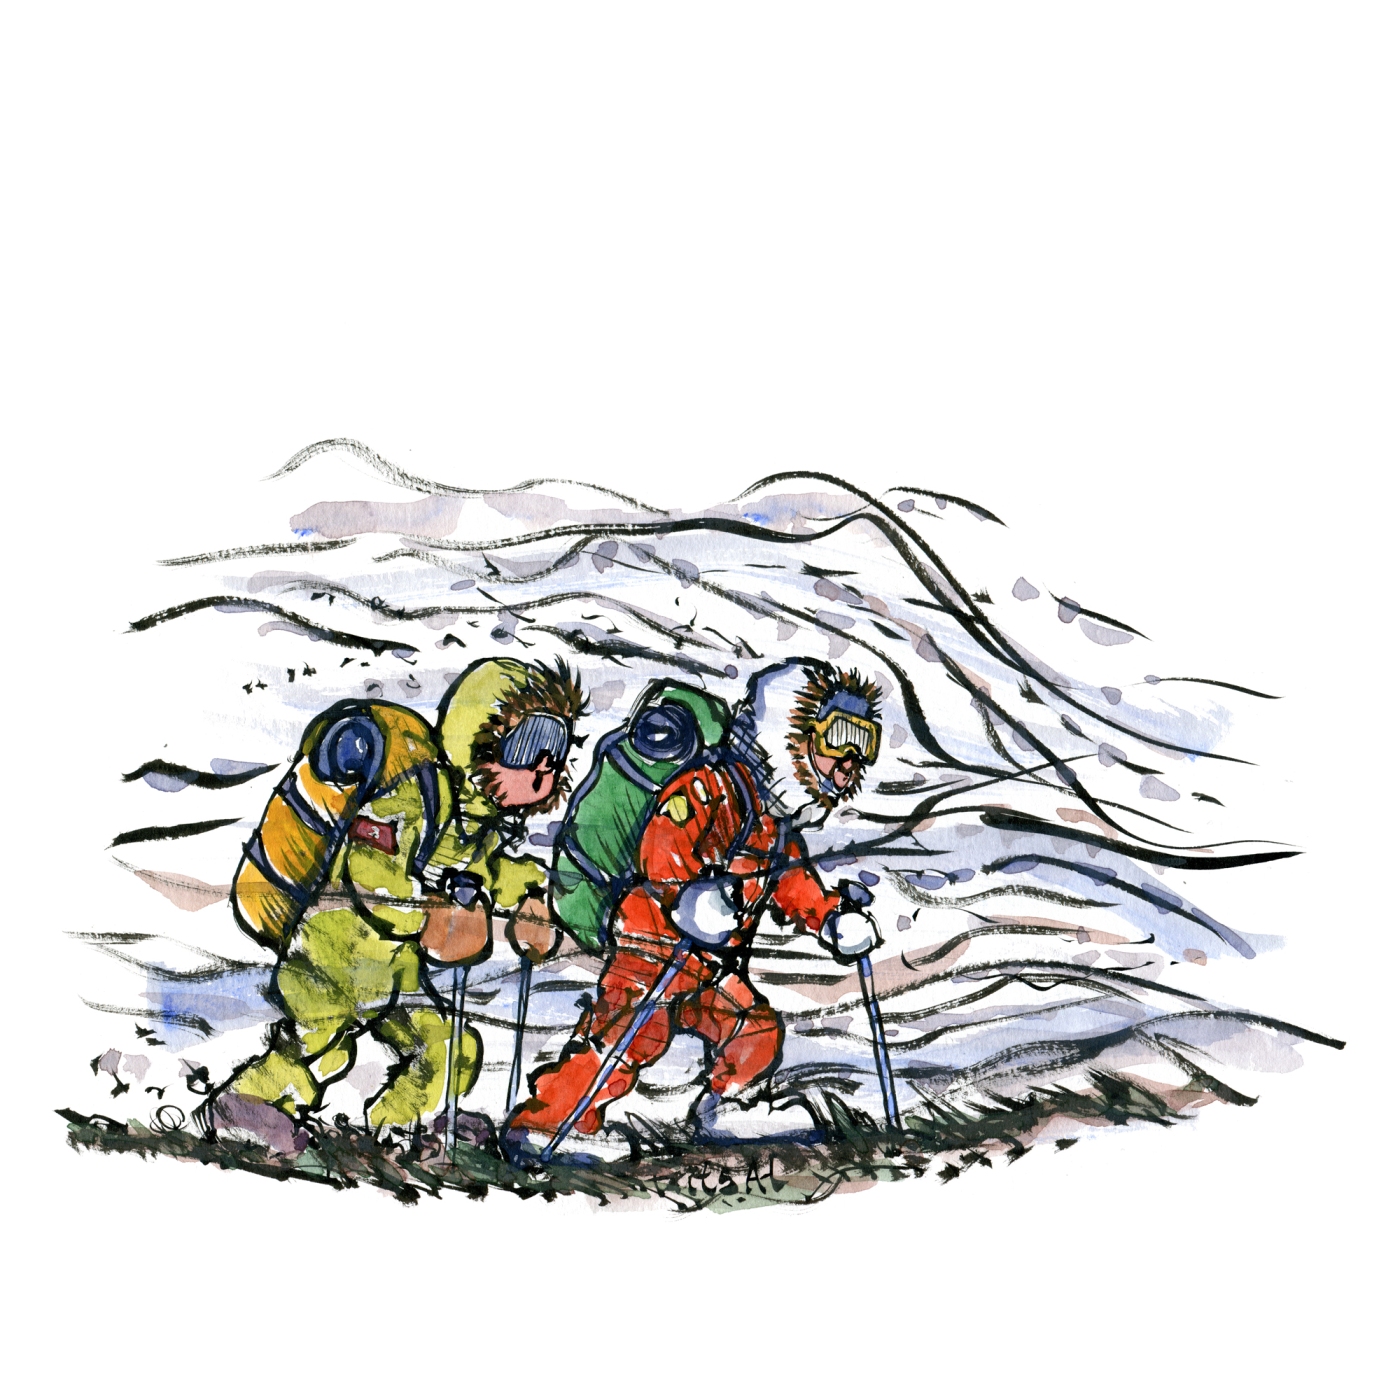 Drawing of two expedition hikers, in extreme weather